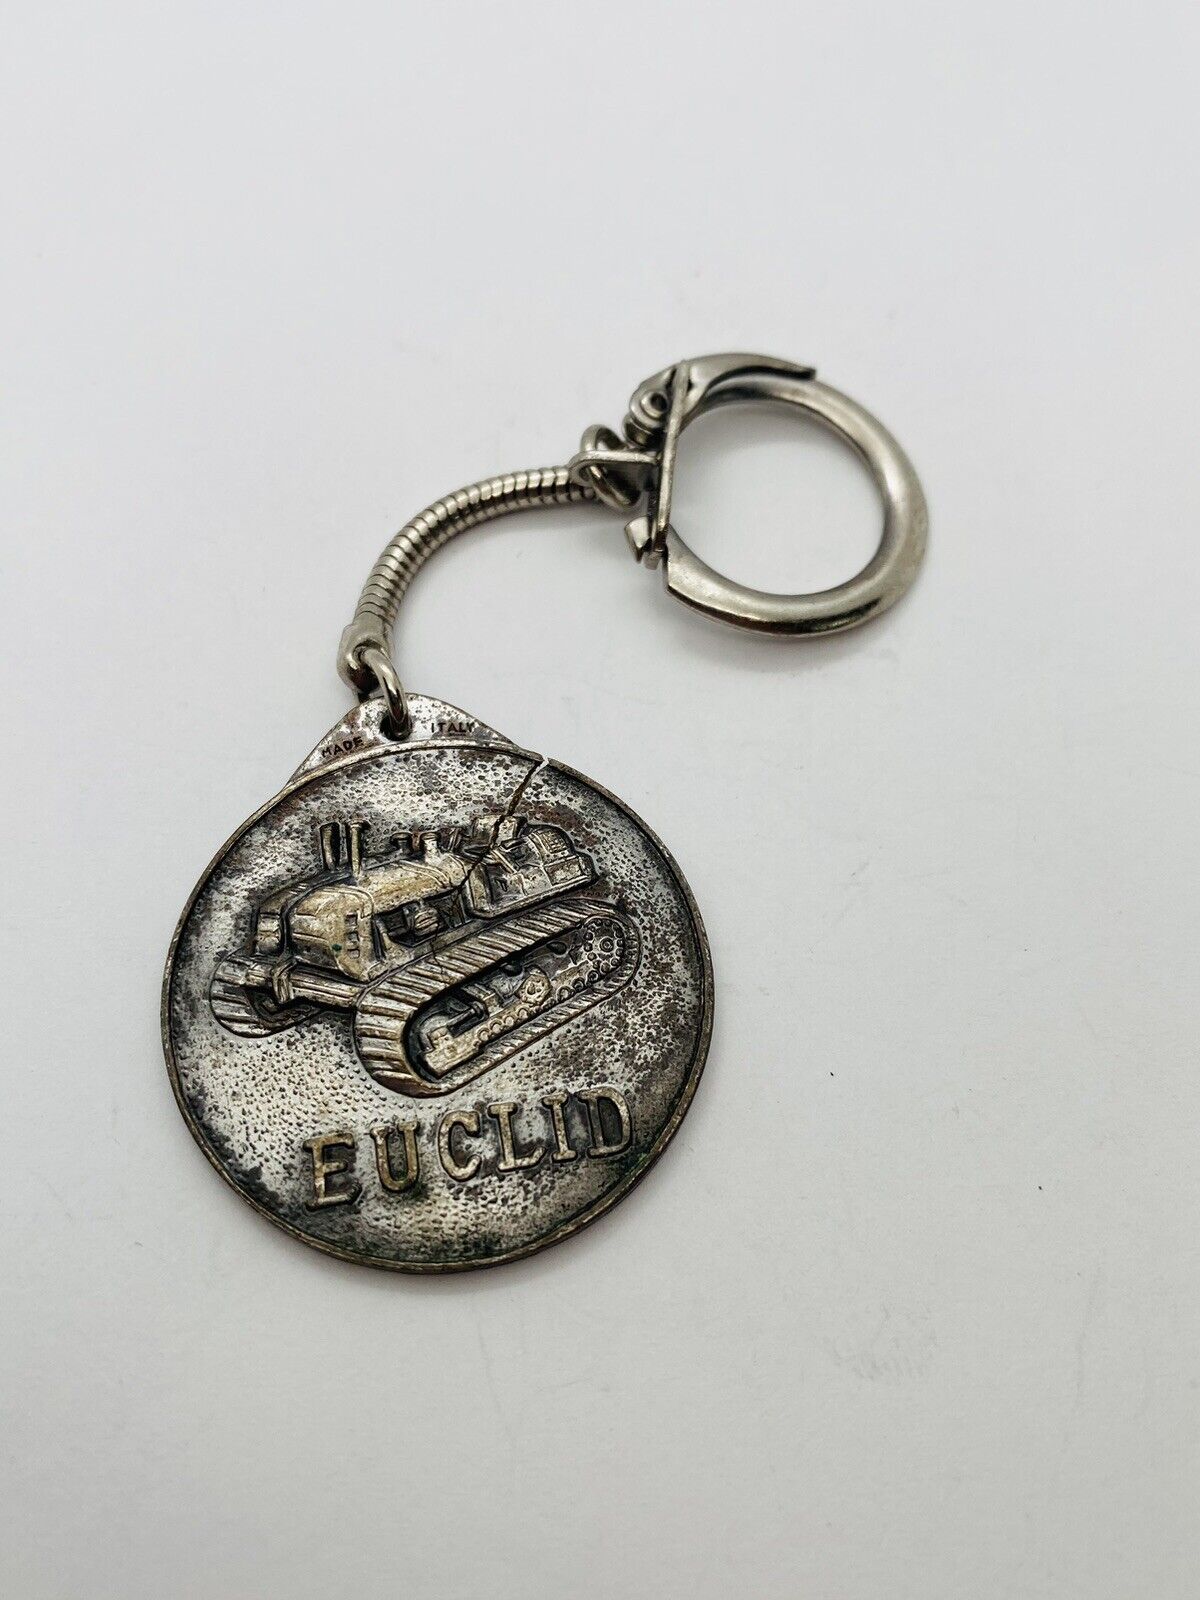 VINTAGE EUCLID TRACTORS KEYCHAIN COIN TOKEN USED